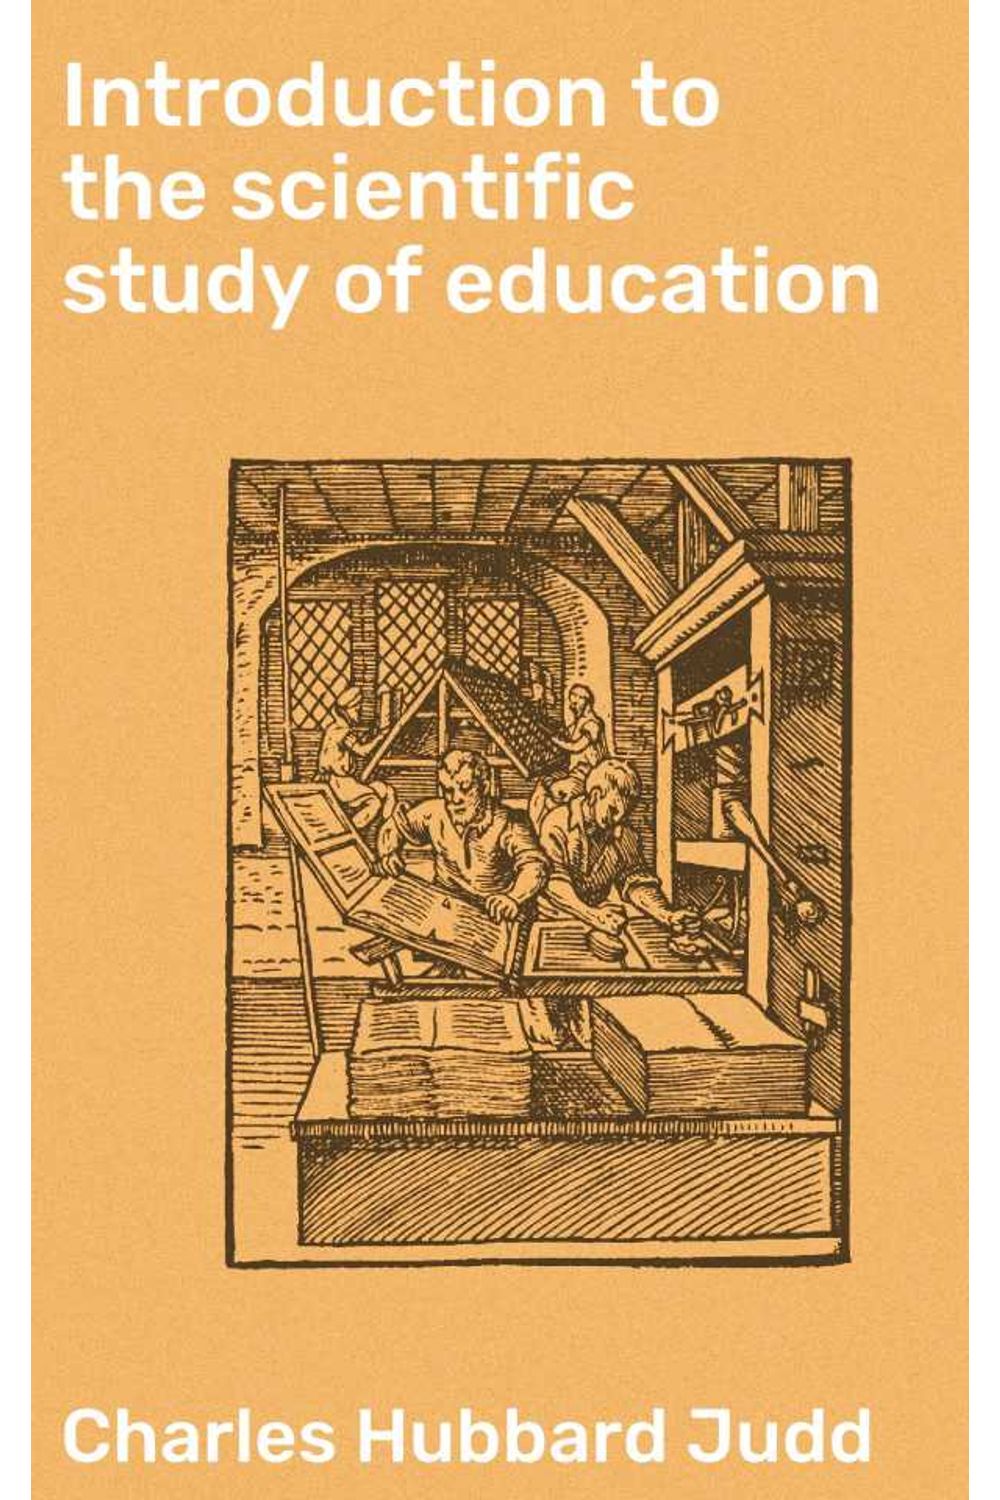 bw-introduction-to-the-scientific-study-of-education-good-press-4057664605276